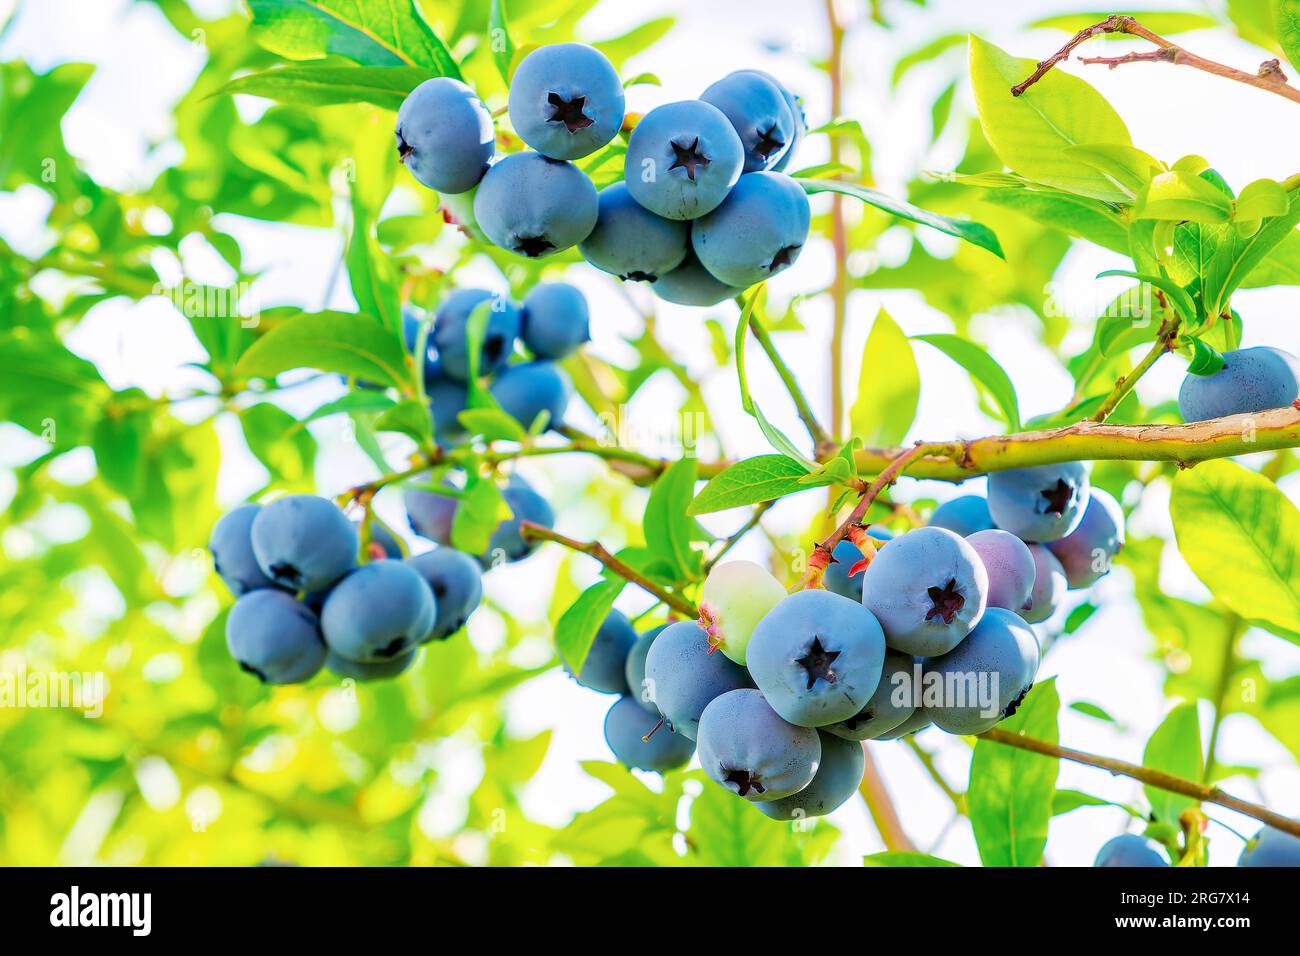 Blueberries. Bunches of ripe large berries on the bush of the blueberry plant Stock Photo